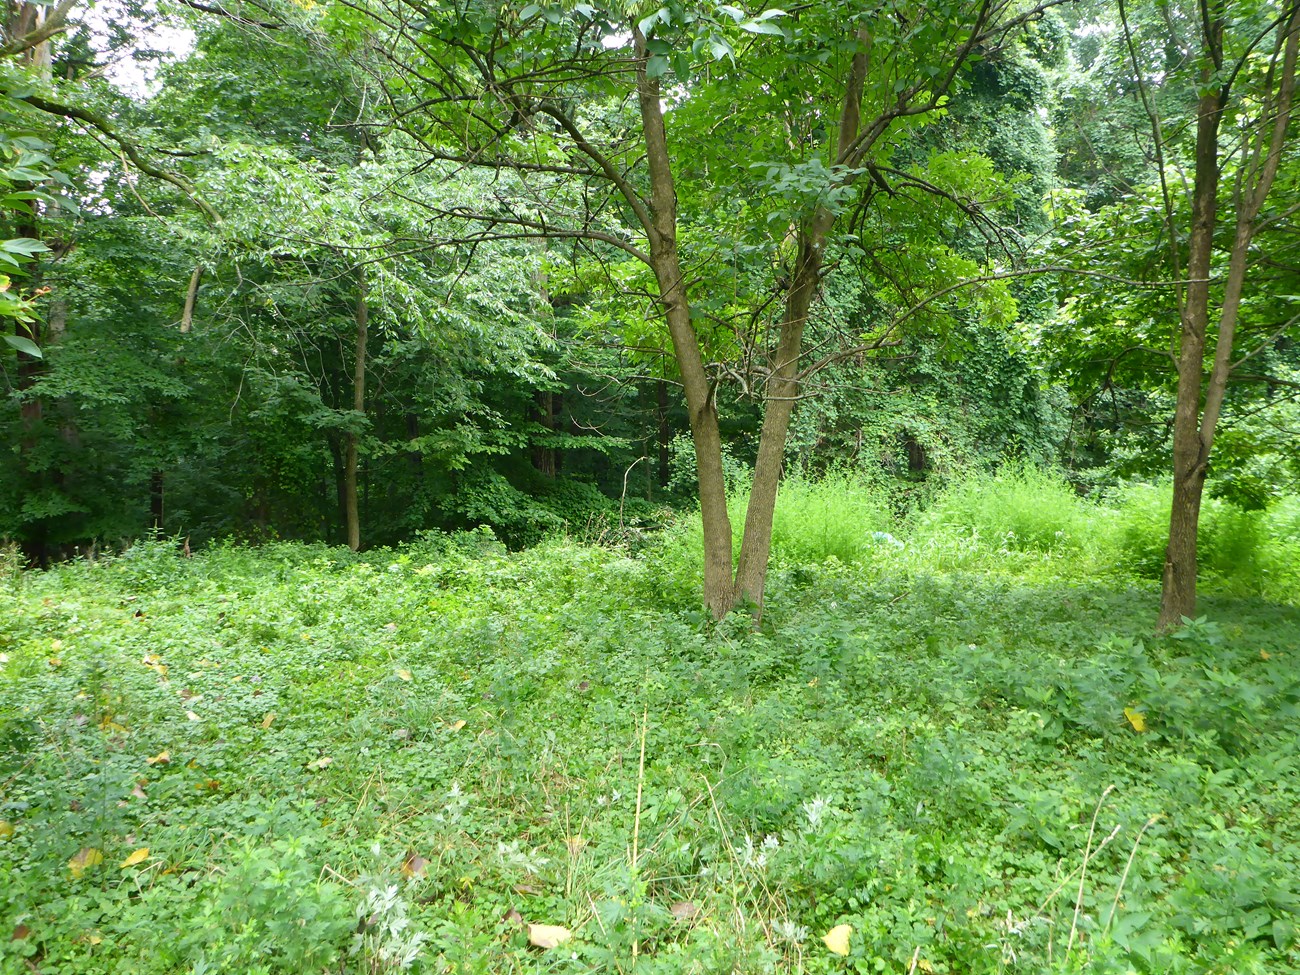 Thick shrubs cover a forest floor and taller trees stand in the background.